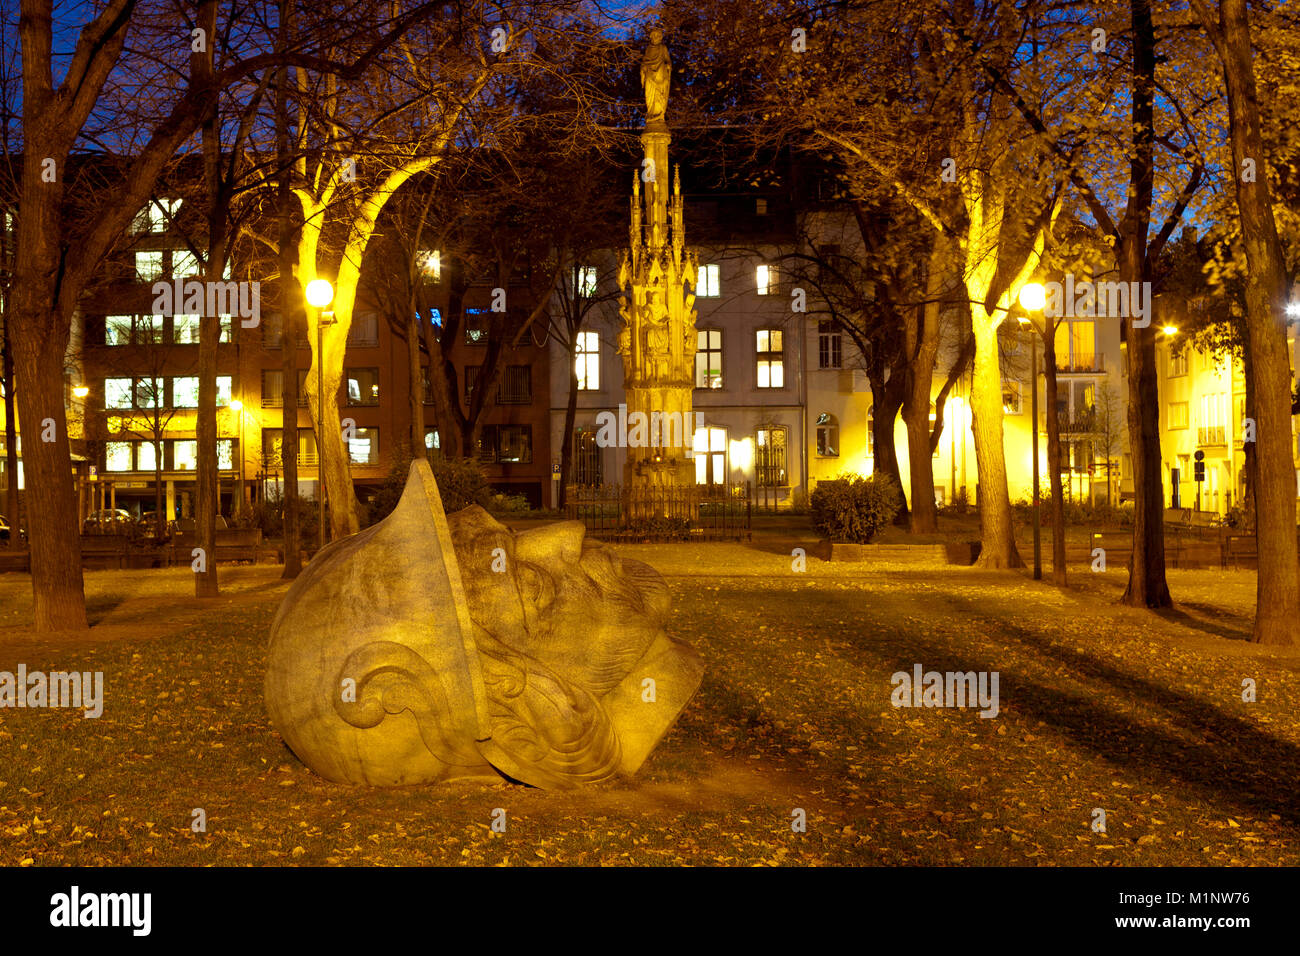 Germany, Cologne, head of the holy St. Gereon at the samll park Gereonsdriesch near the romanesque church St. Gereon, sculpture by Iskender Yediler ma Stock Photo